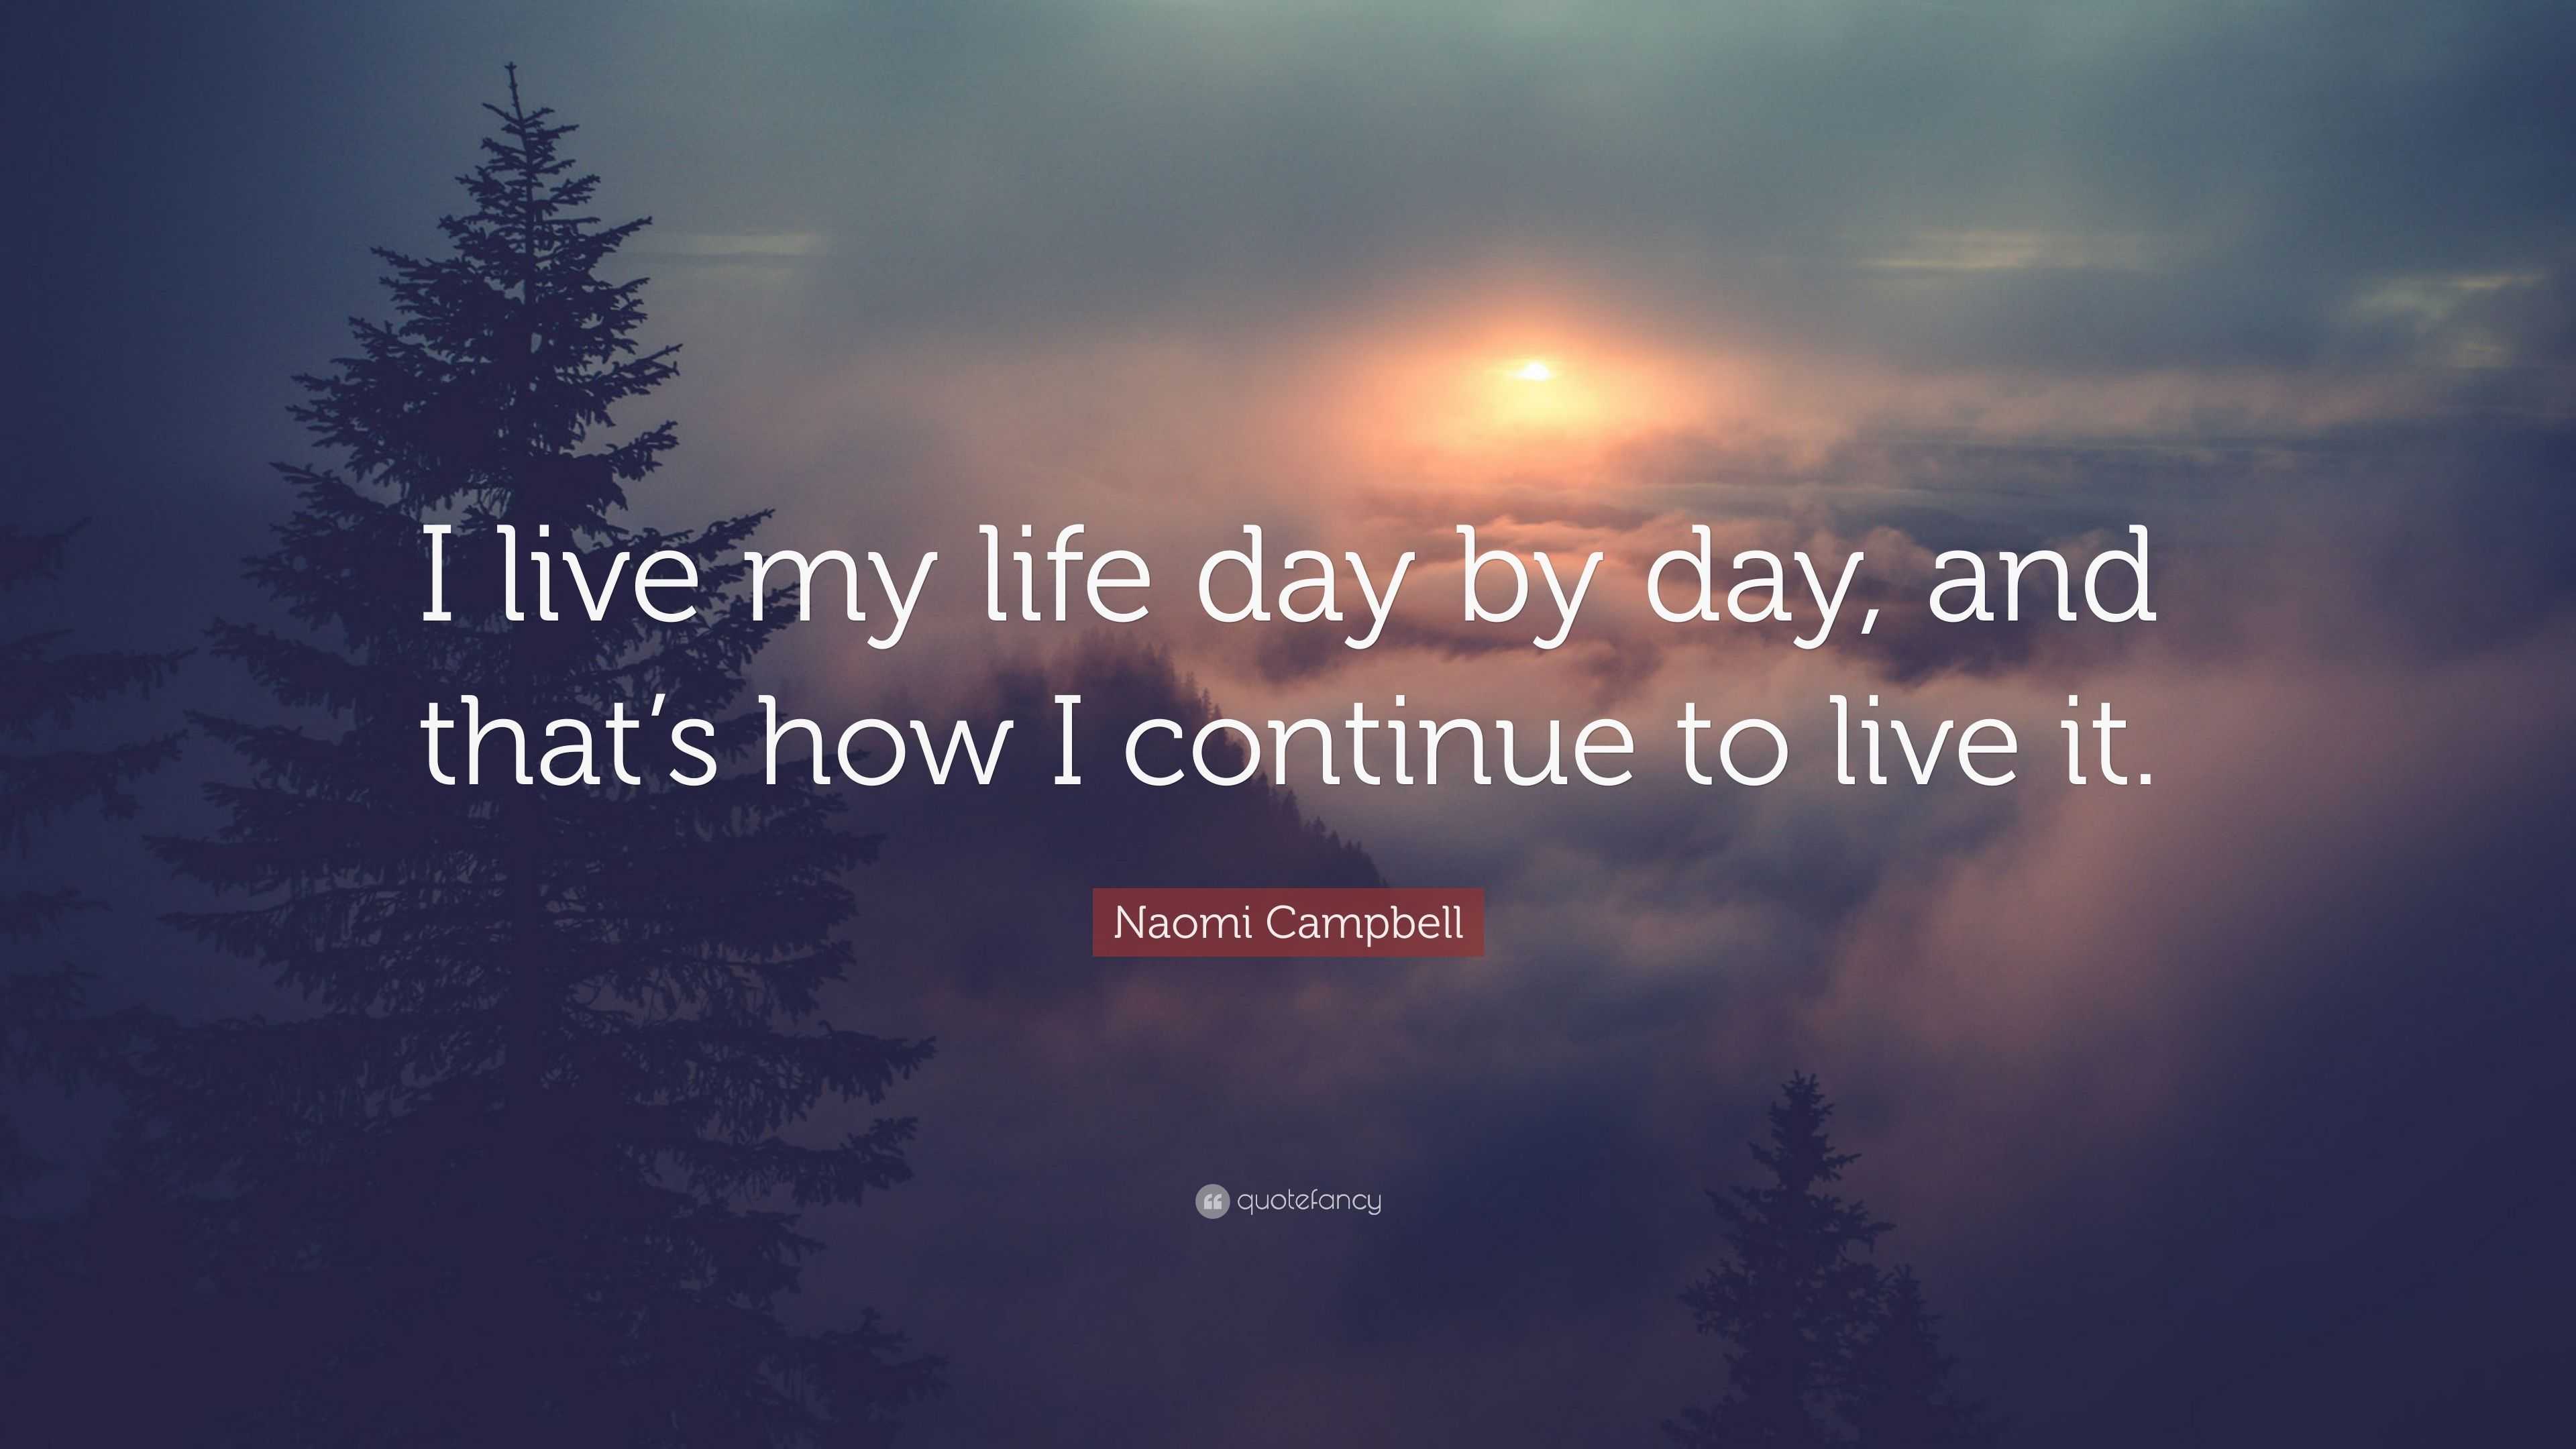 Naomi Campbell Quote “I live my life day by day and that s how